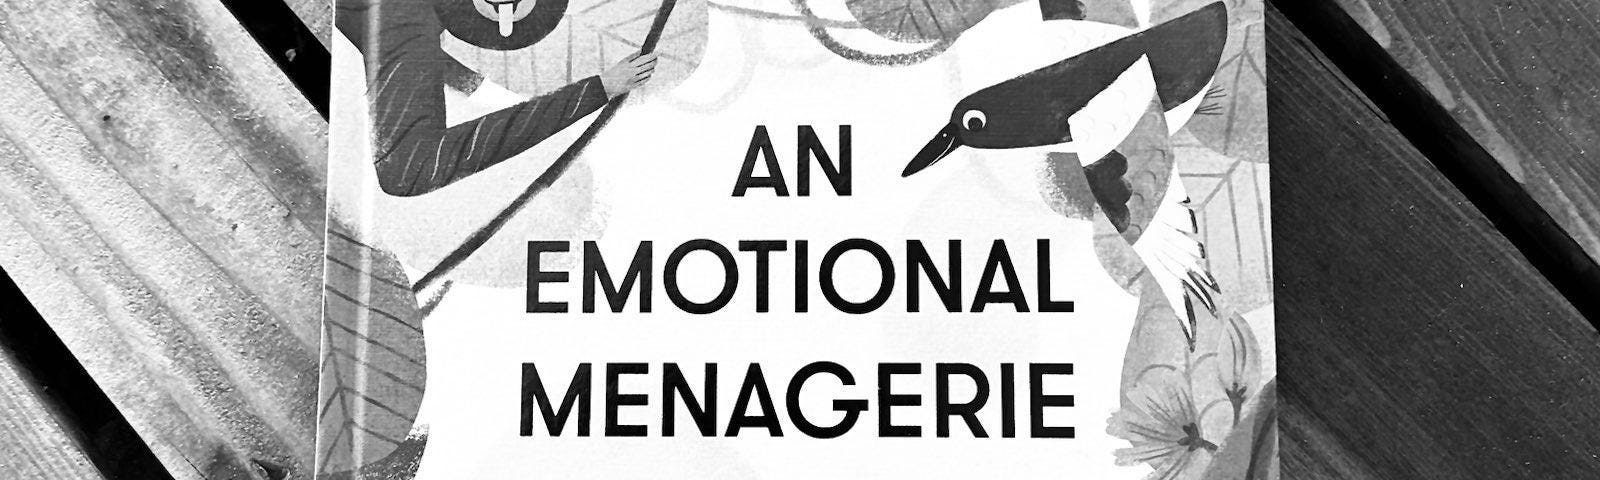 A black and white photo of the book “An emotional menagerie” over a wooden surface.